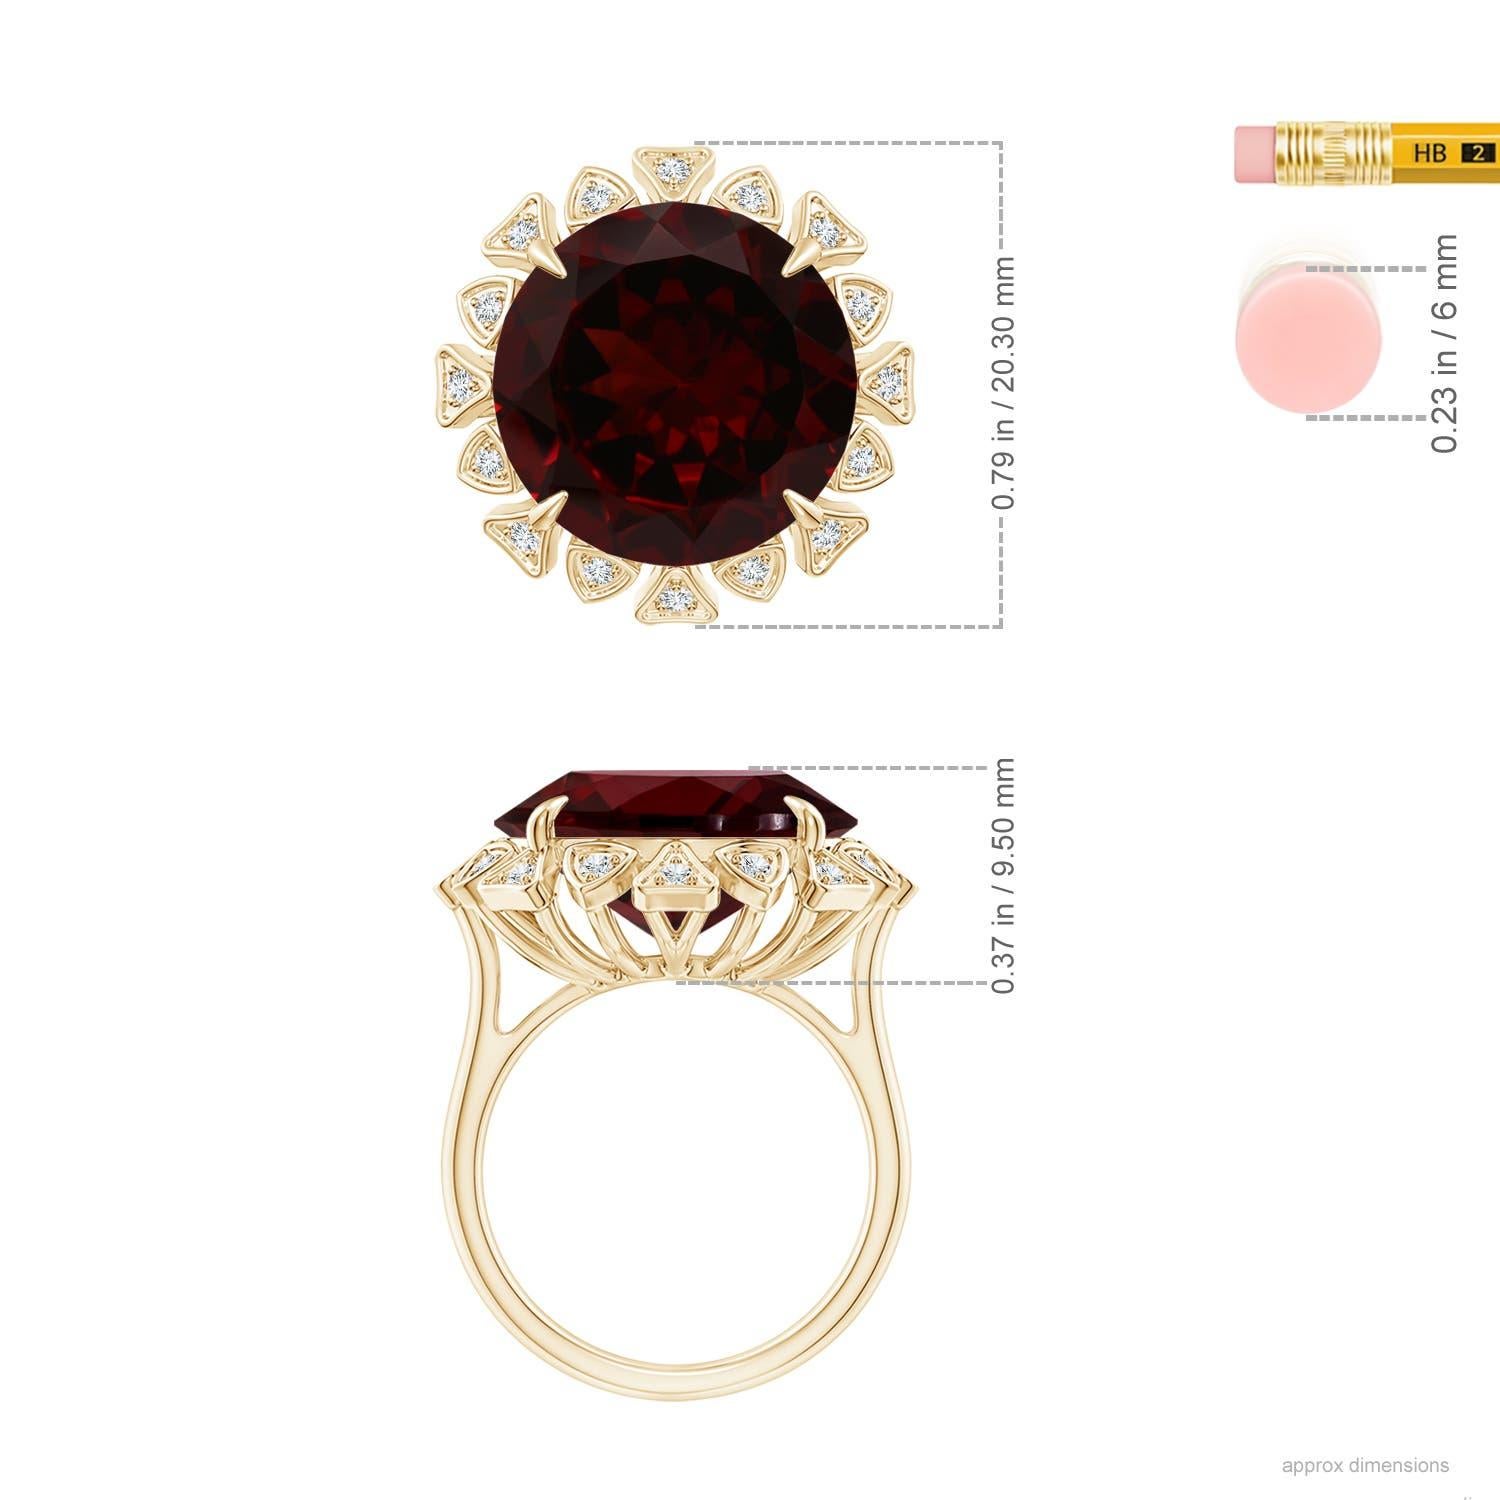 For Sale:  Angara Gia Certified Natural Garnet Yellow Gold Ring with Triangular Motif Halo 5